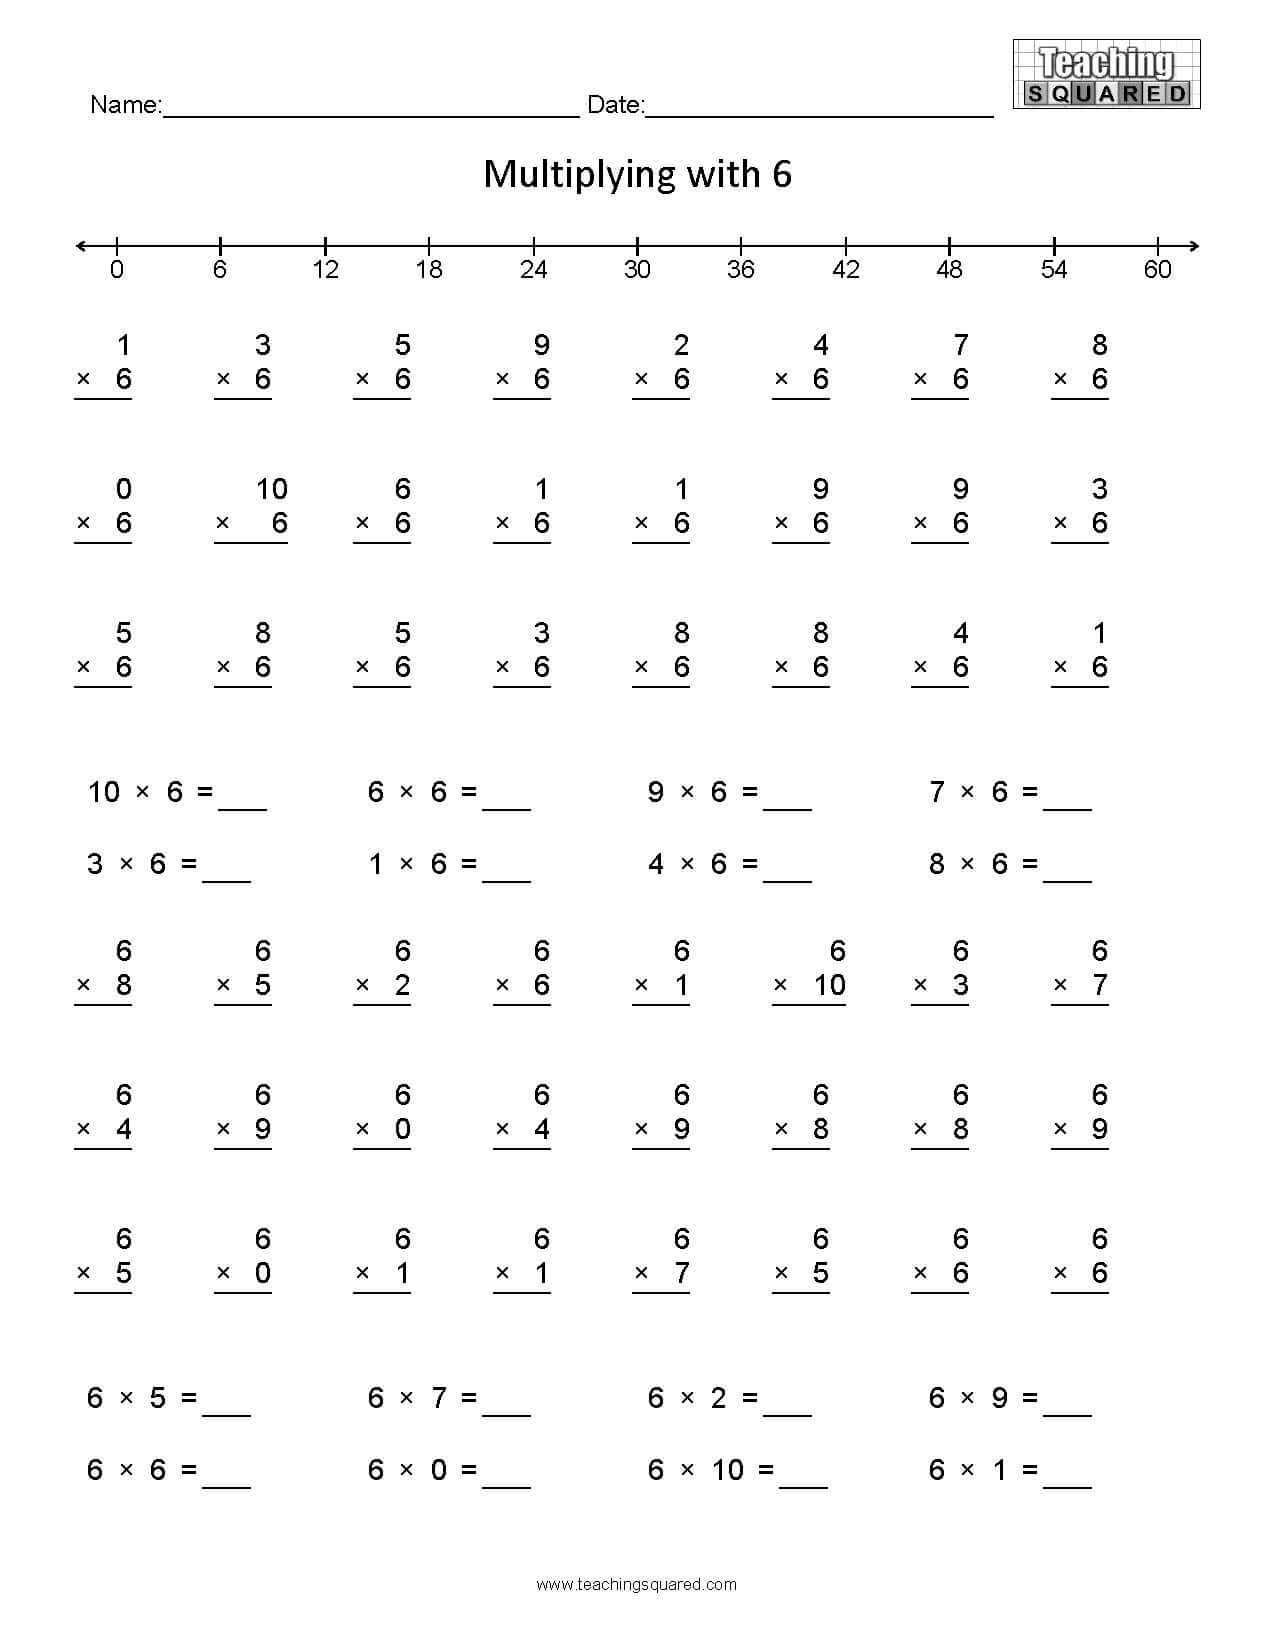 Learning Multiplication- Multiplying6 - Teaching Squared inside Printable Multiplication By 6